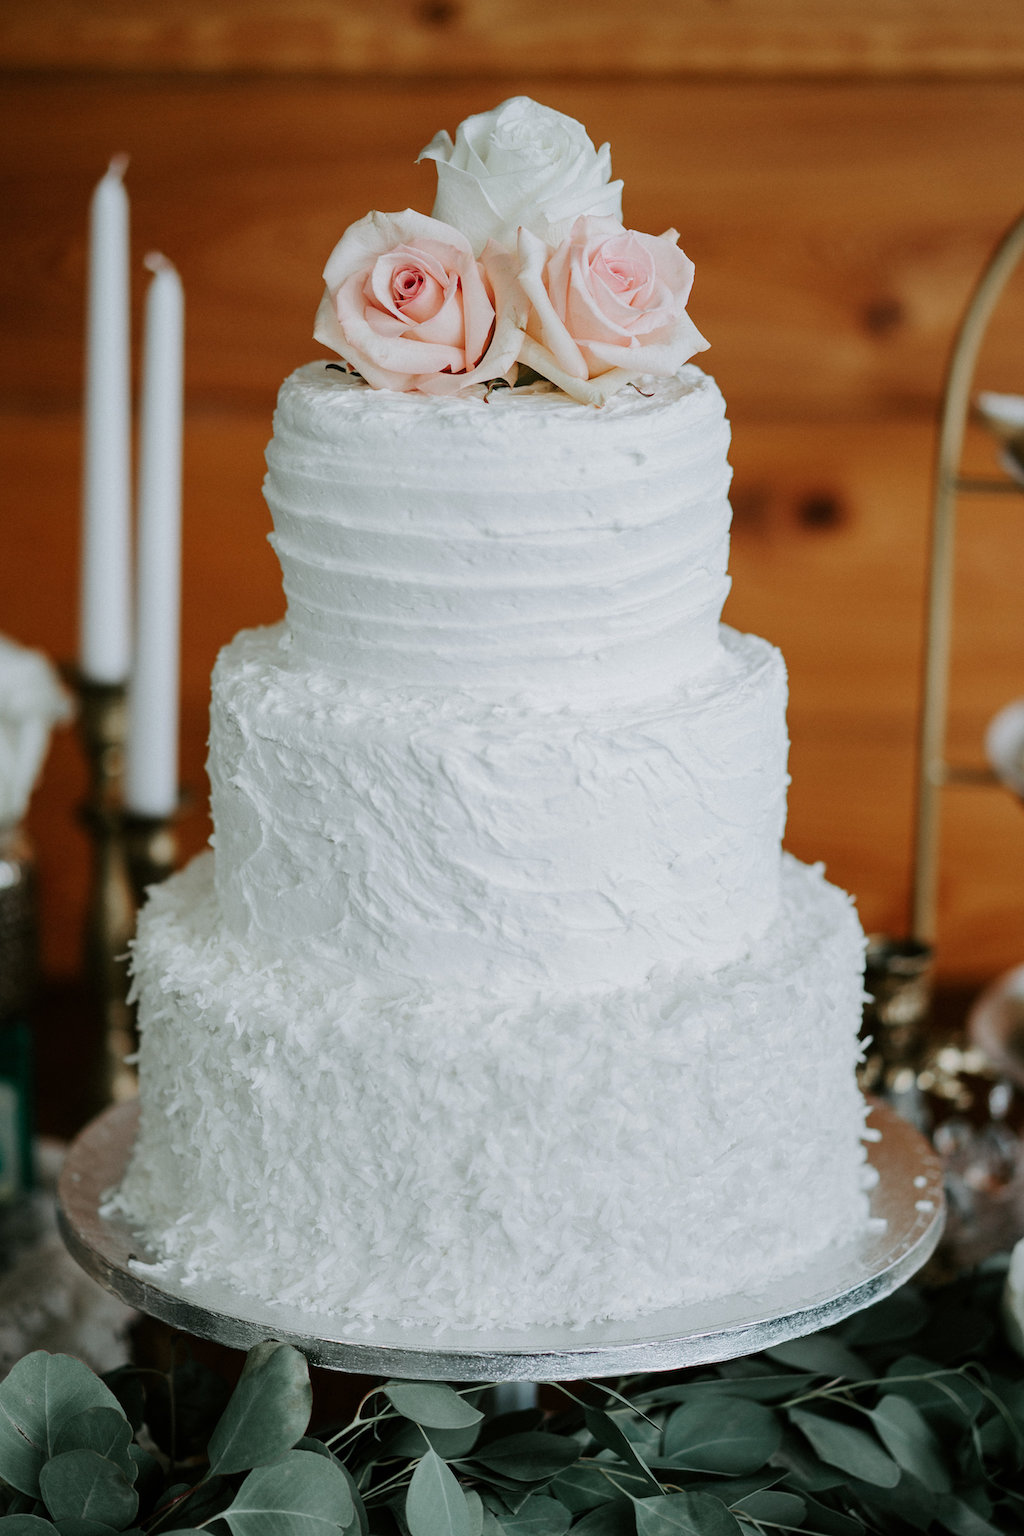 Three Tiered Round White Wedding Cake with Blush Rose Cake Topper and Simple Silver Cake Tray